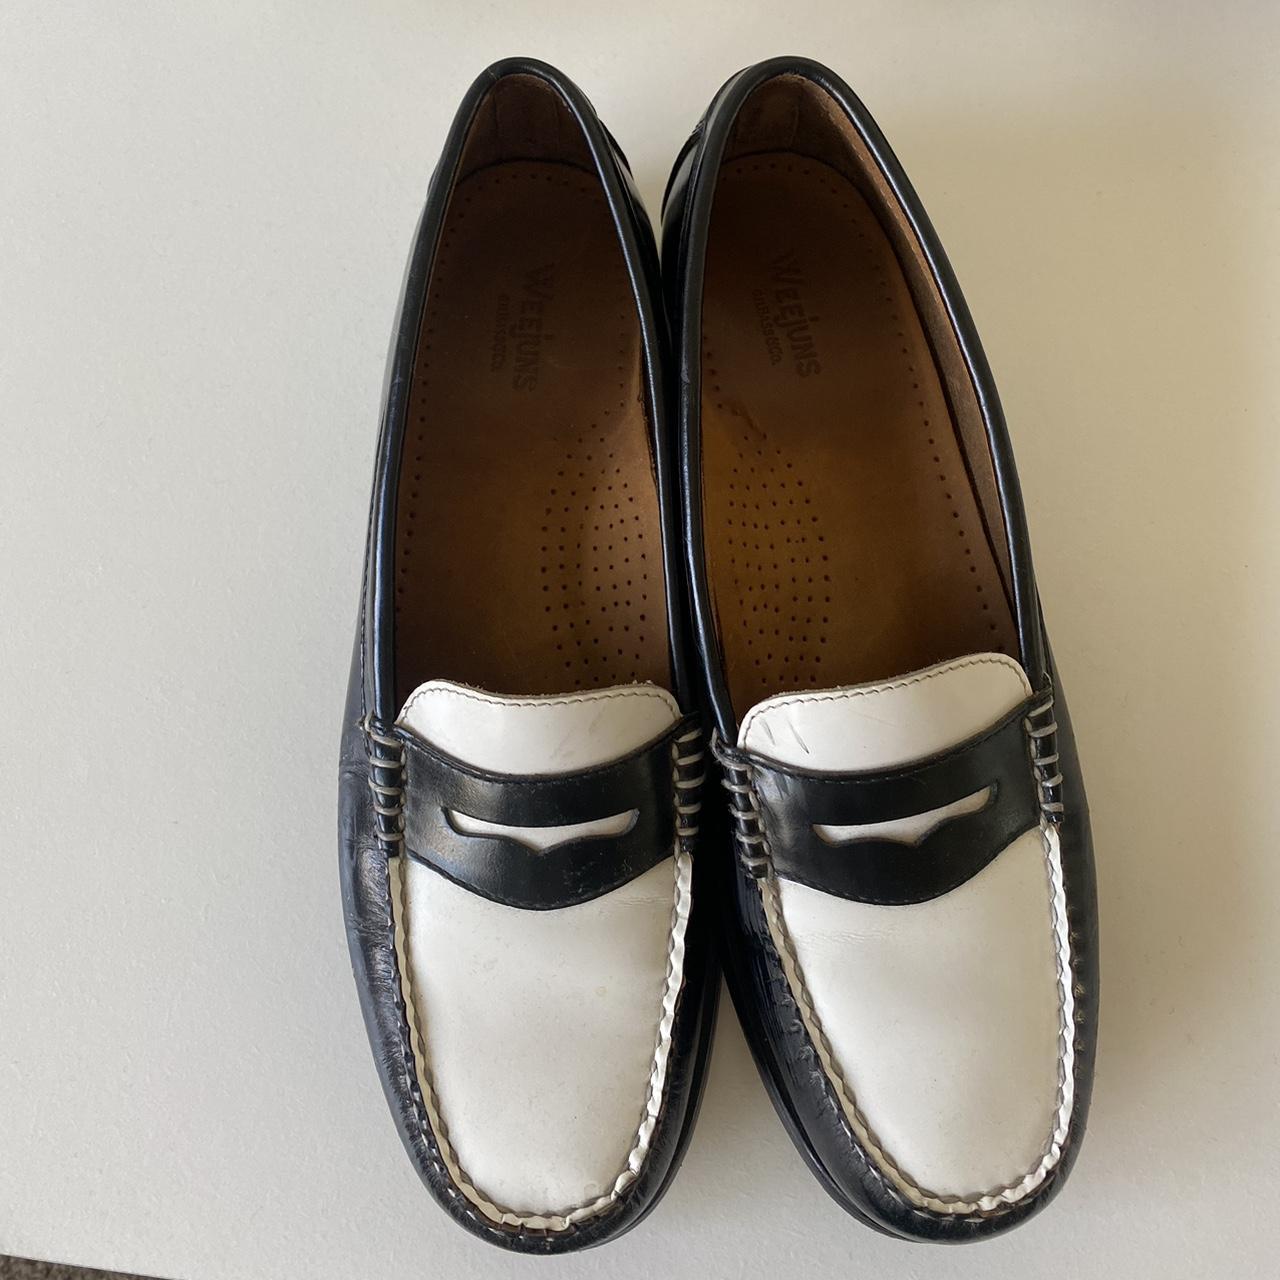 Women's Black and White Loafers | Depop